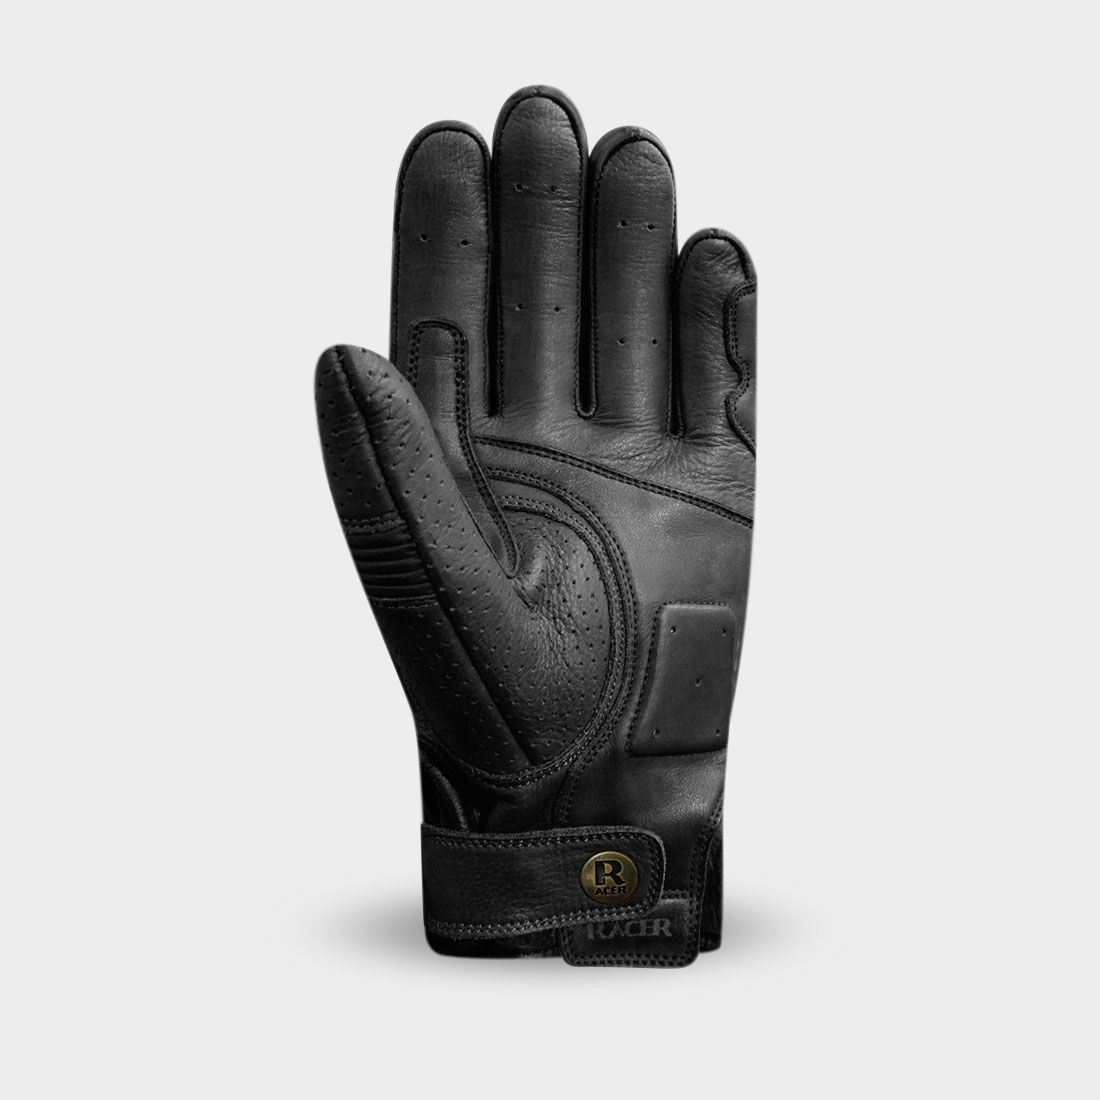 Vintage Glove - Waxed leather - DANTE